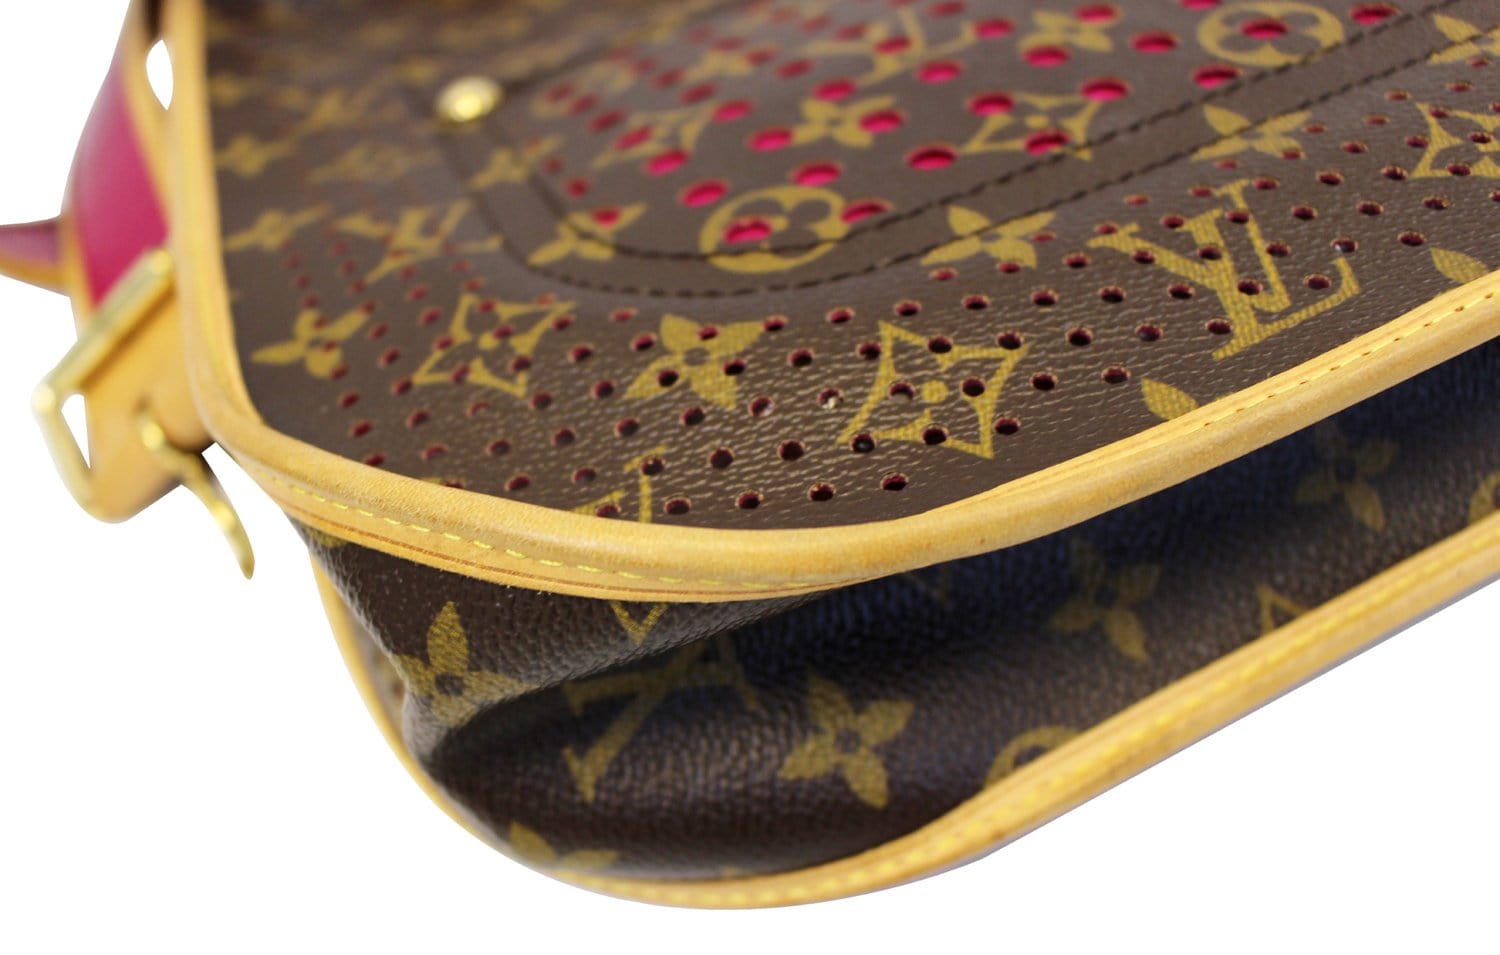 Louis Vuitton Limited Edition Fuchsia Perforated Monogram Musette Bag' In  Brown, ModeSens